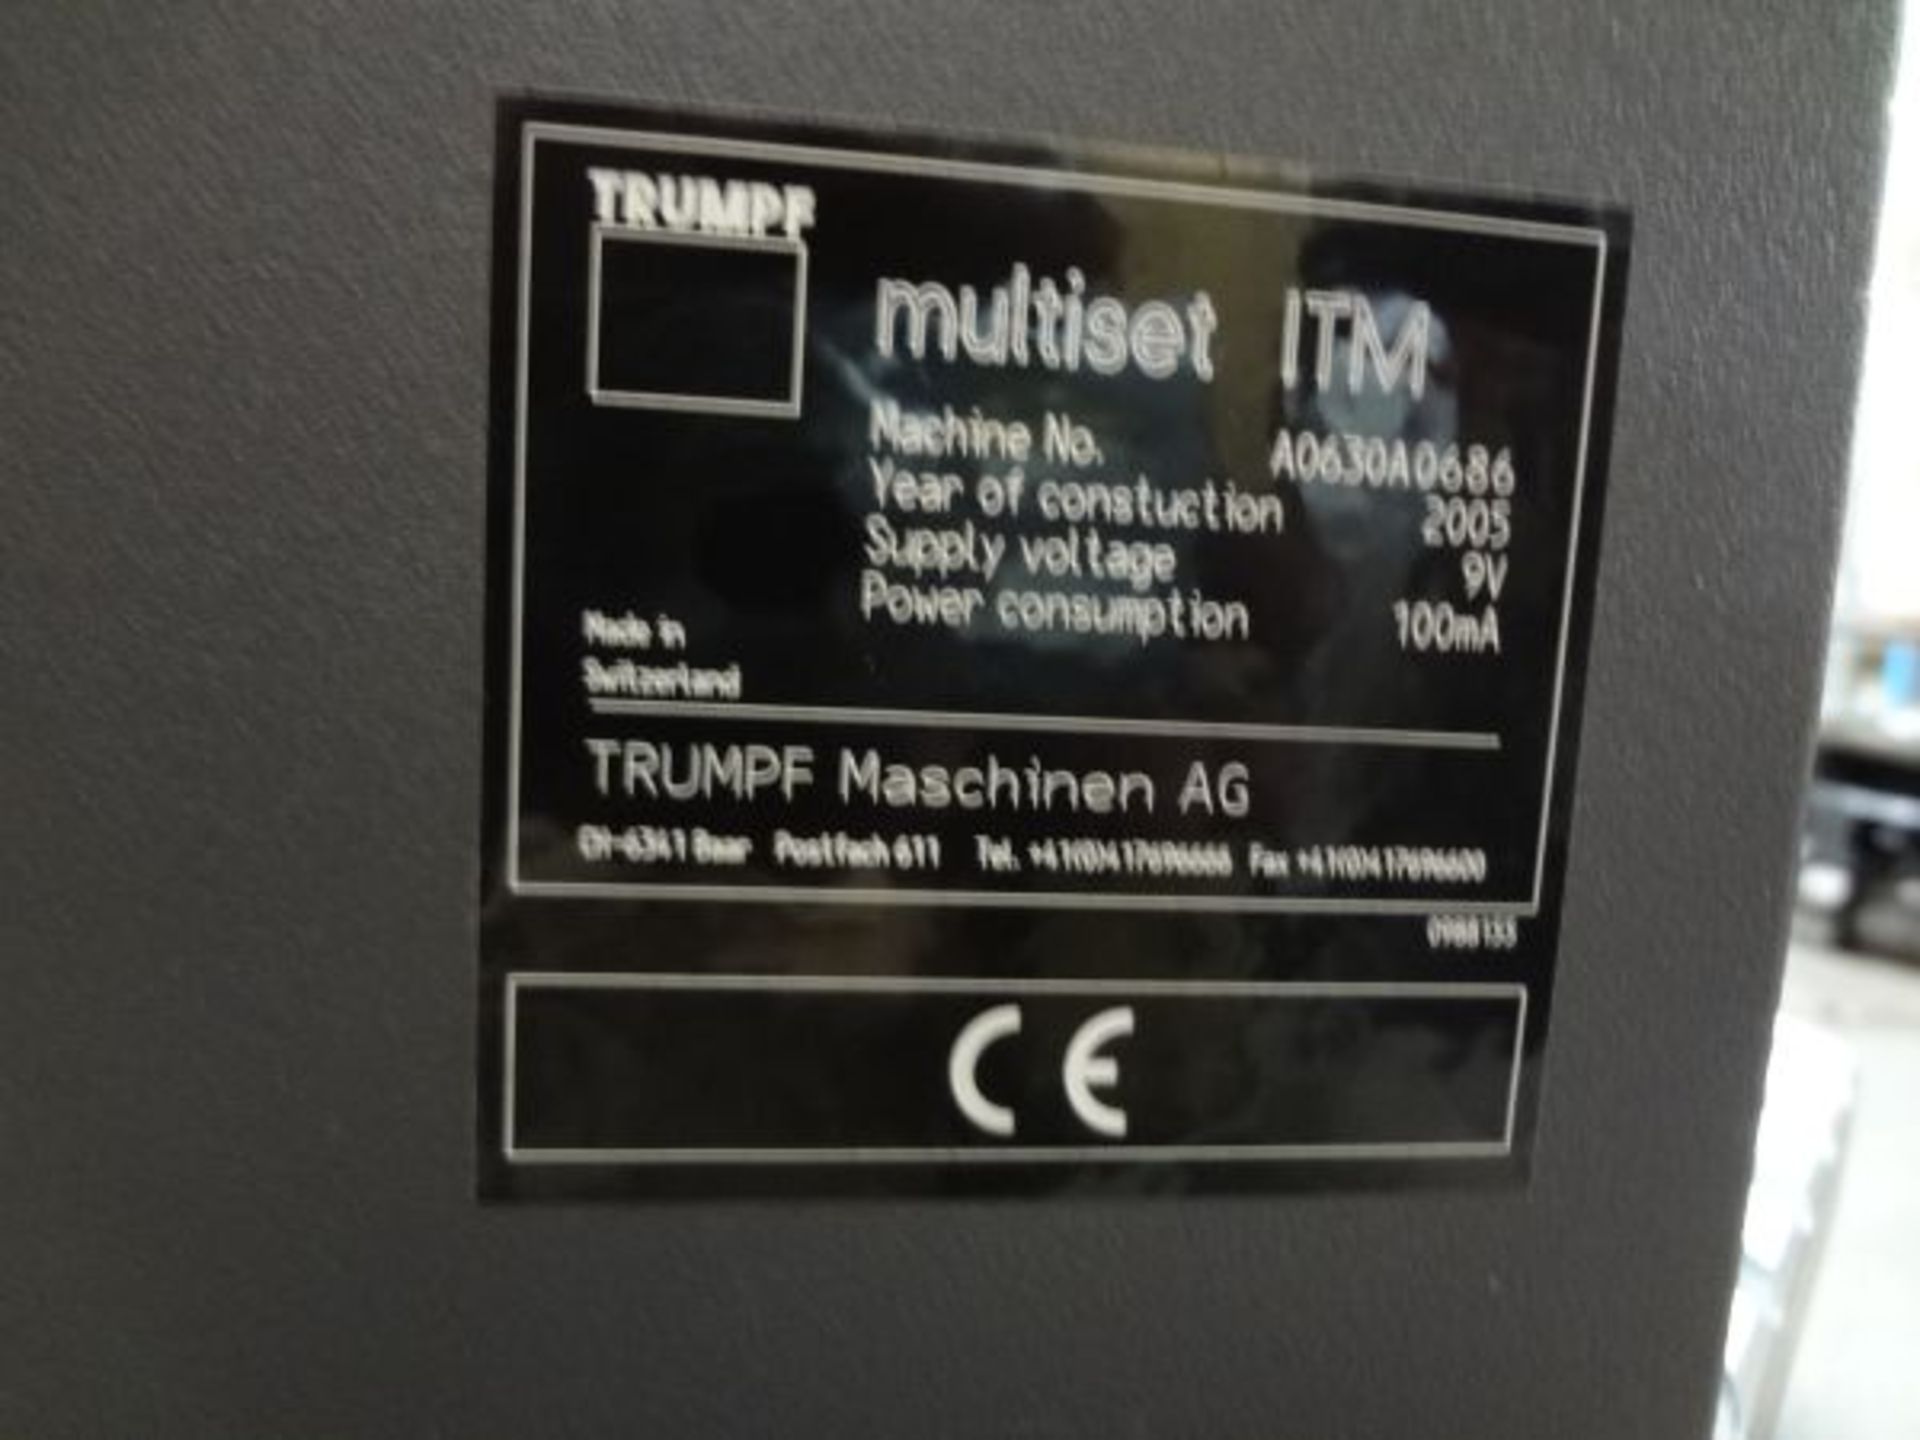 TRUMPF MULTISET ITM PUNCH SETTER; S/N A0630A0686, DIGITAL CONTROL (2005) - Image 5 of 6